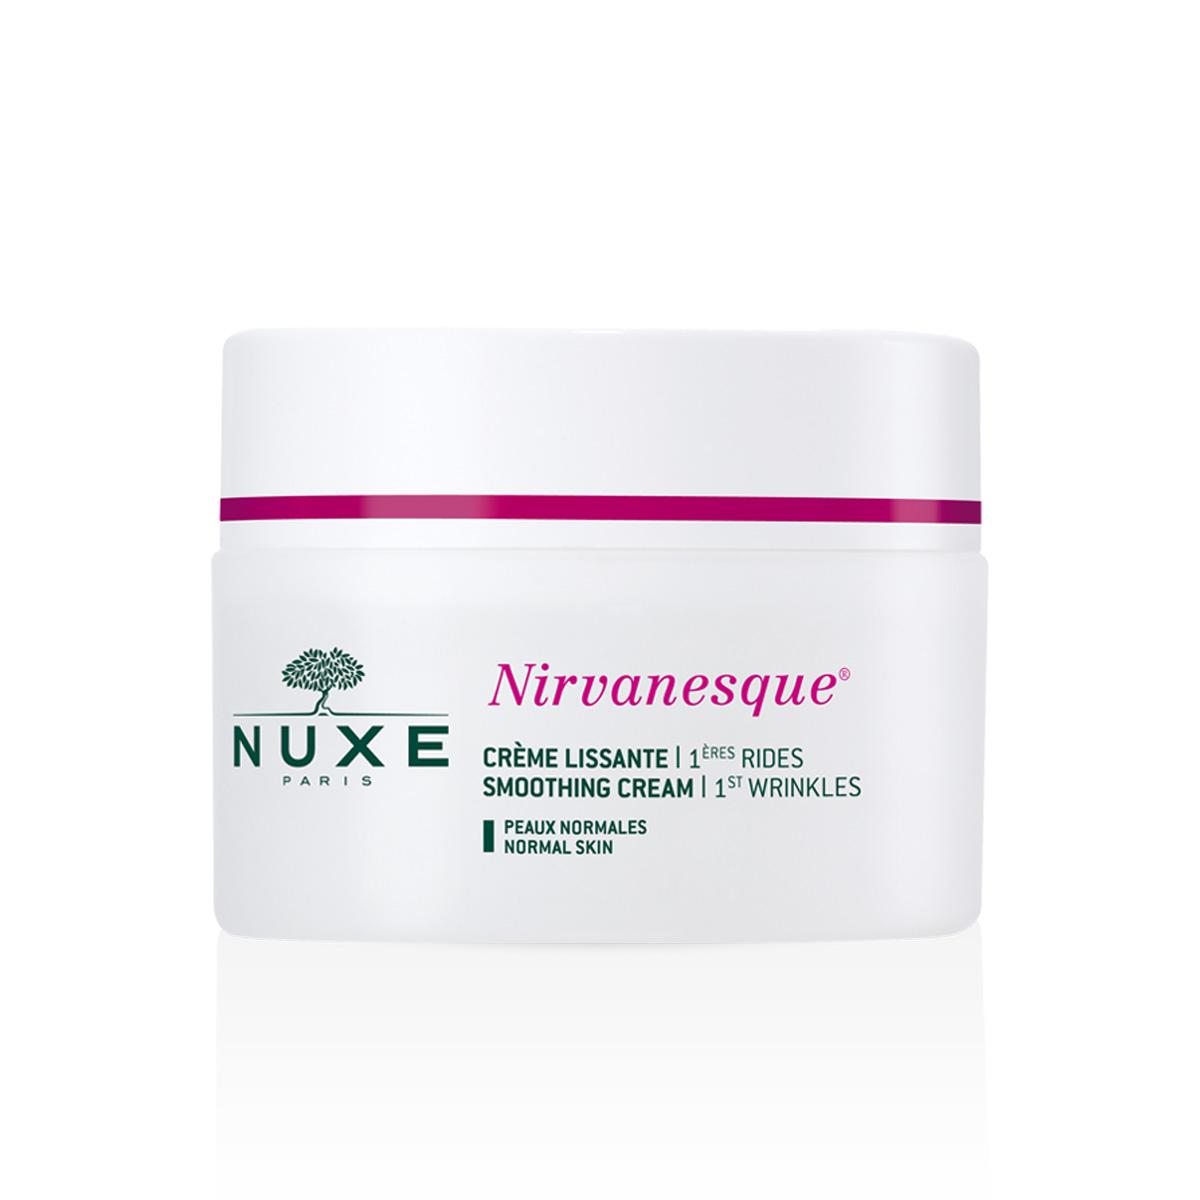 Nirvanesque First wrinkle smoothing - کرم نیروانِسک